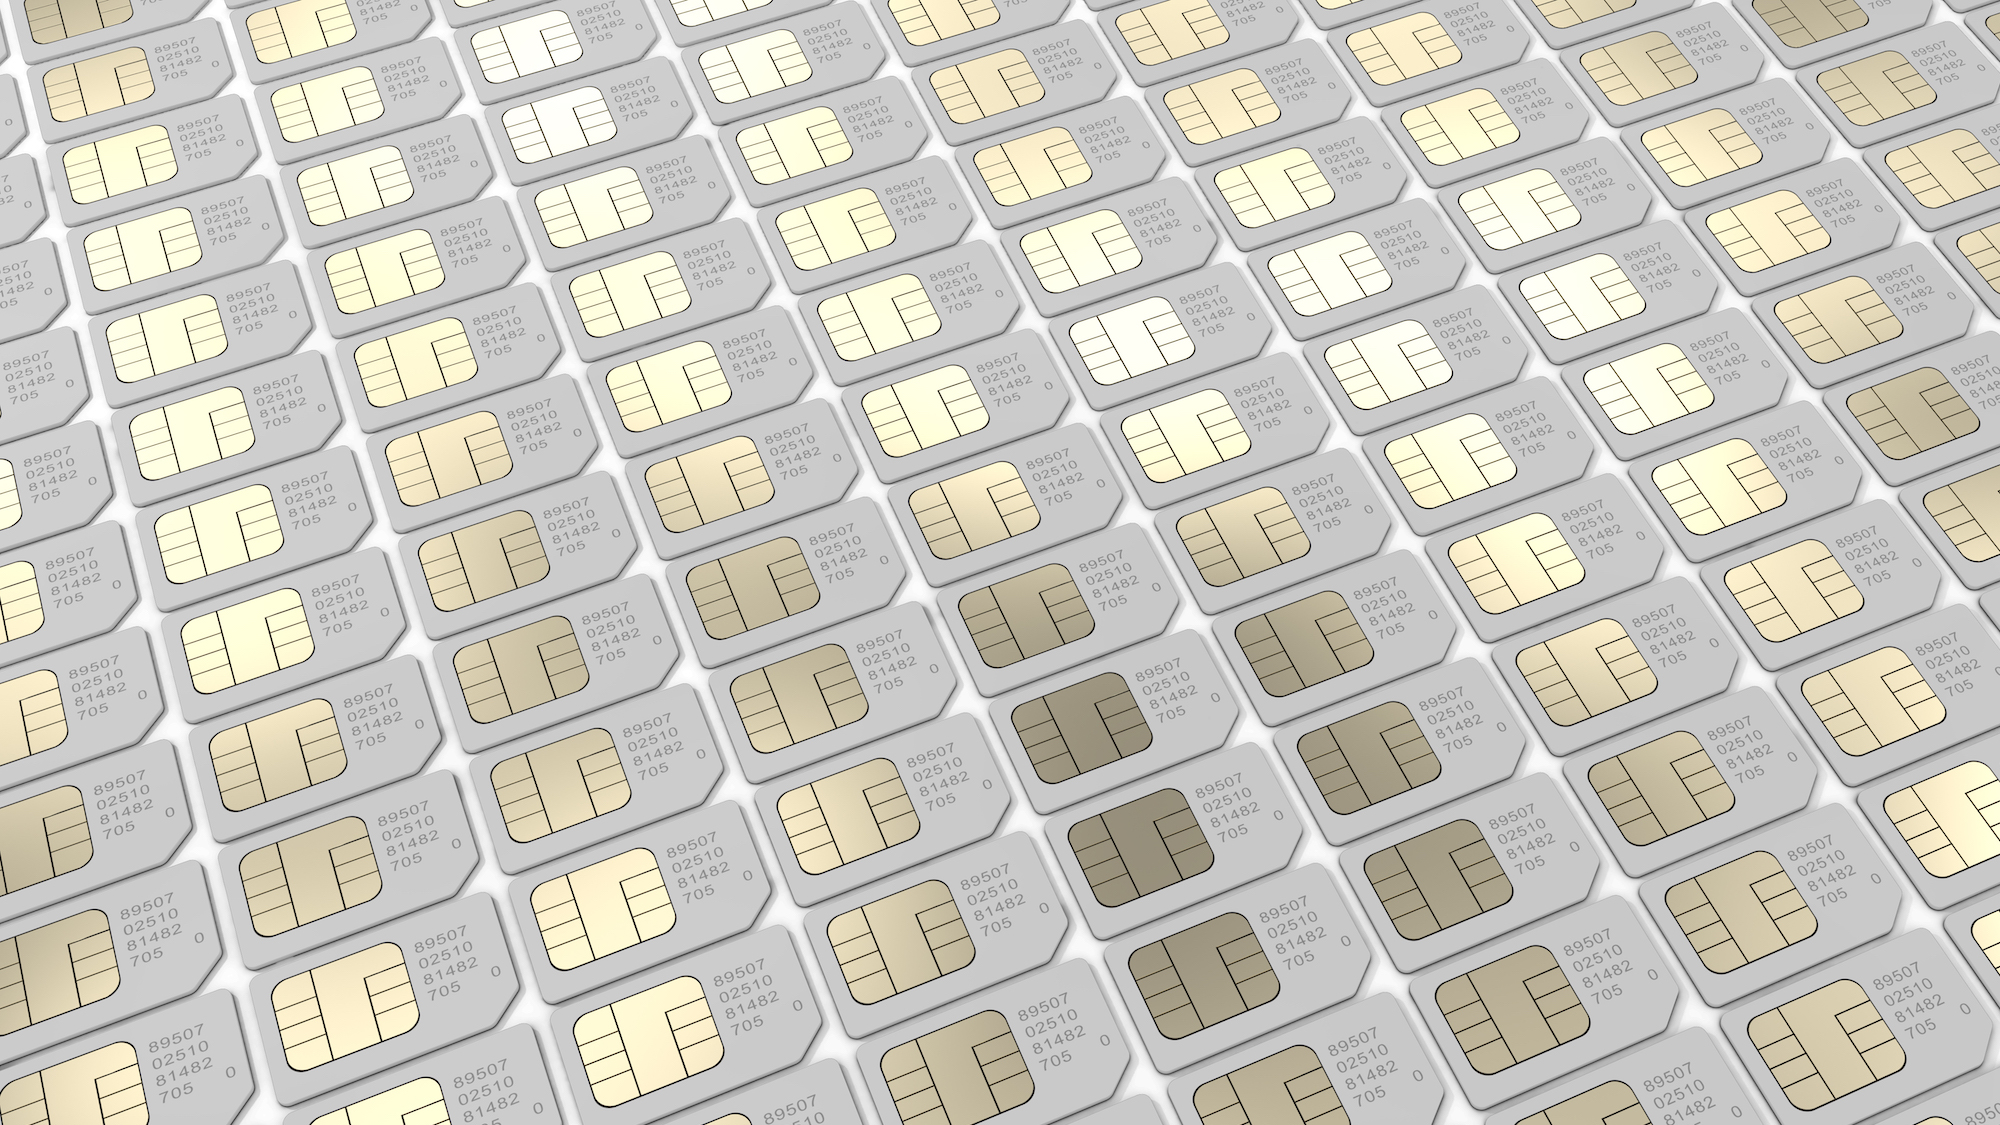 Recycled SIM cards could help produce future drugs